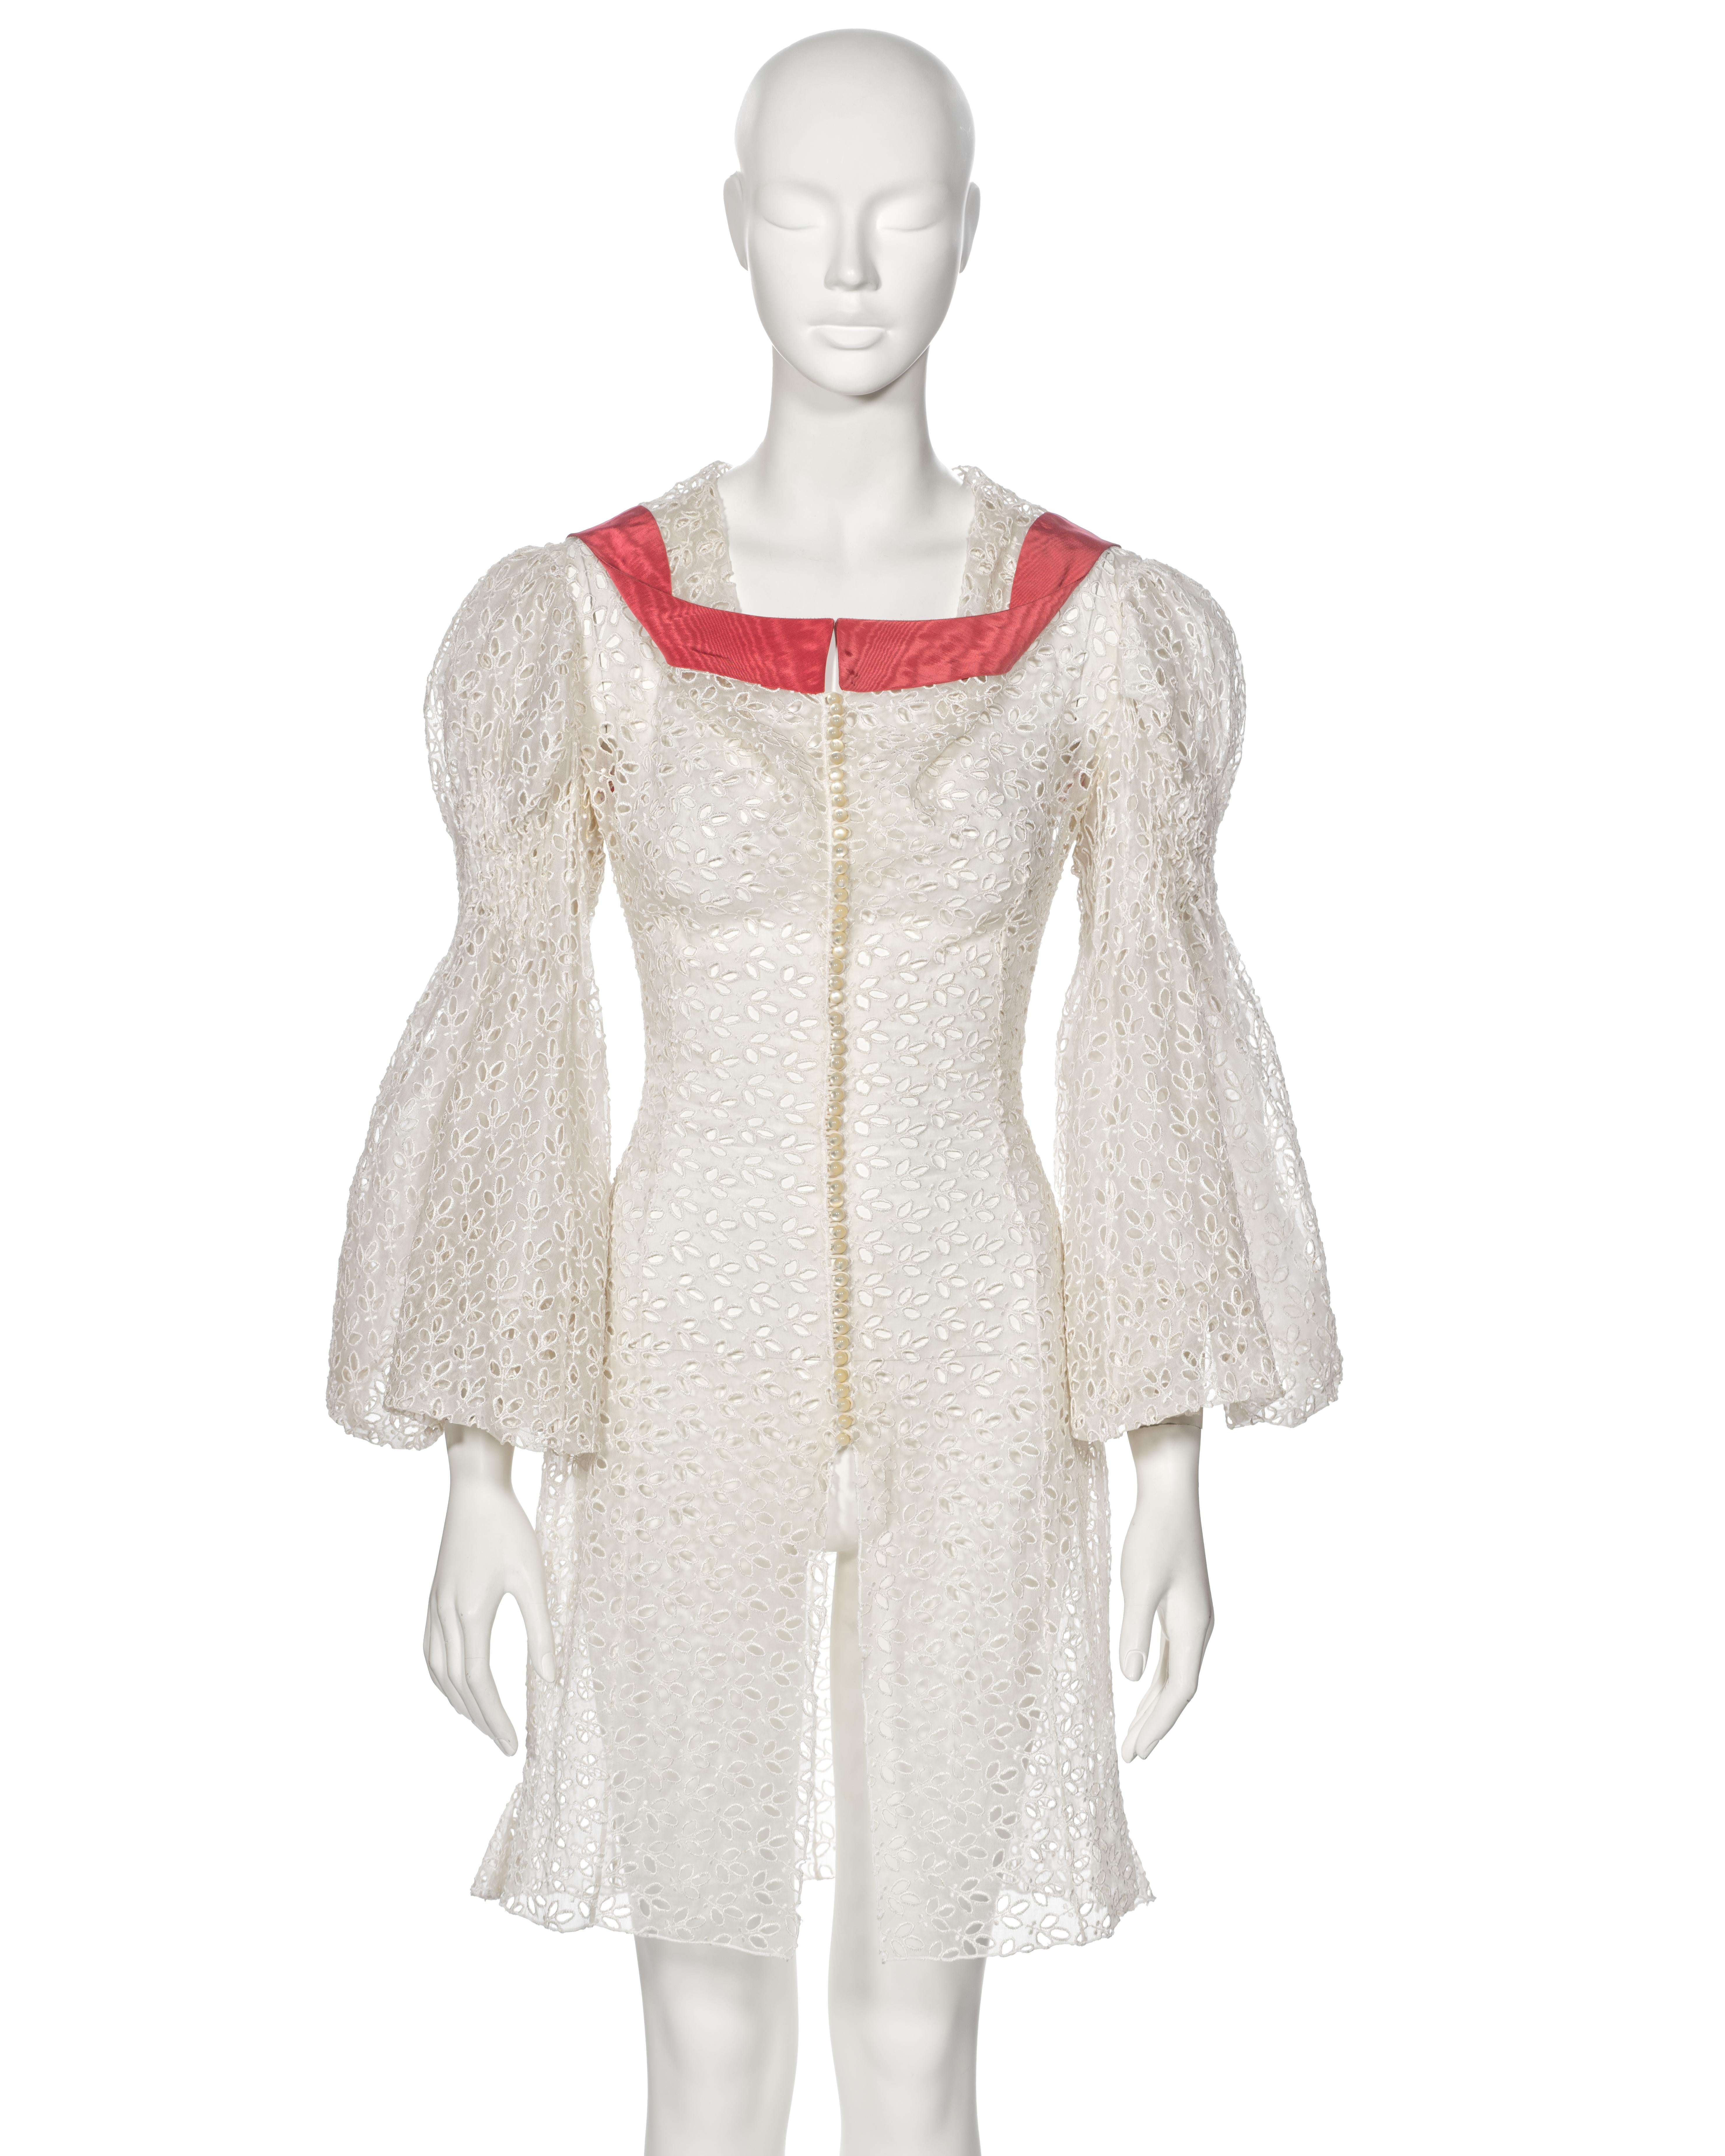 ▪ Archival John Galliano 'L'Ecole de Danse' Dress
▪ Spring-Summer 1996
▪ Sold by One of a Kind Archive
▪ Museum Grade
▪ Crafted from delicate ivory cotton organza with intricate cut-work detailing
▪ Features 50 faux-pearl buttons along the front